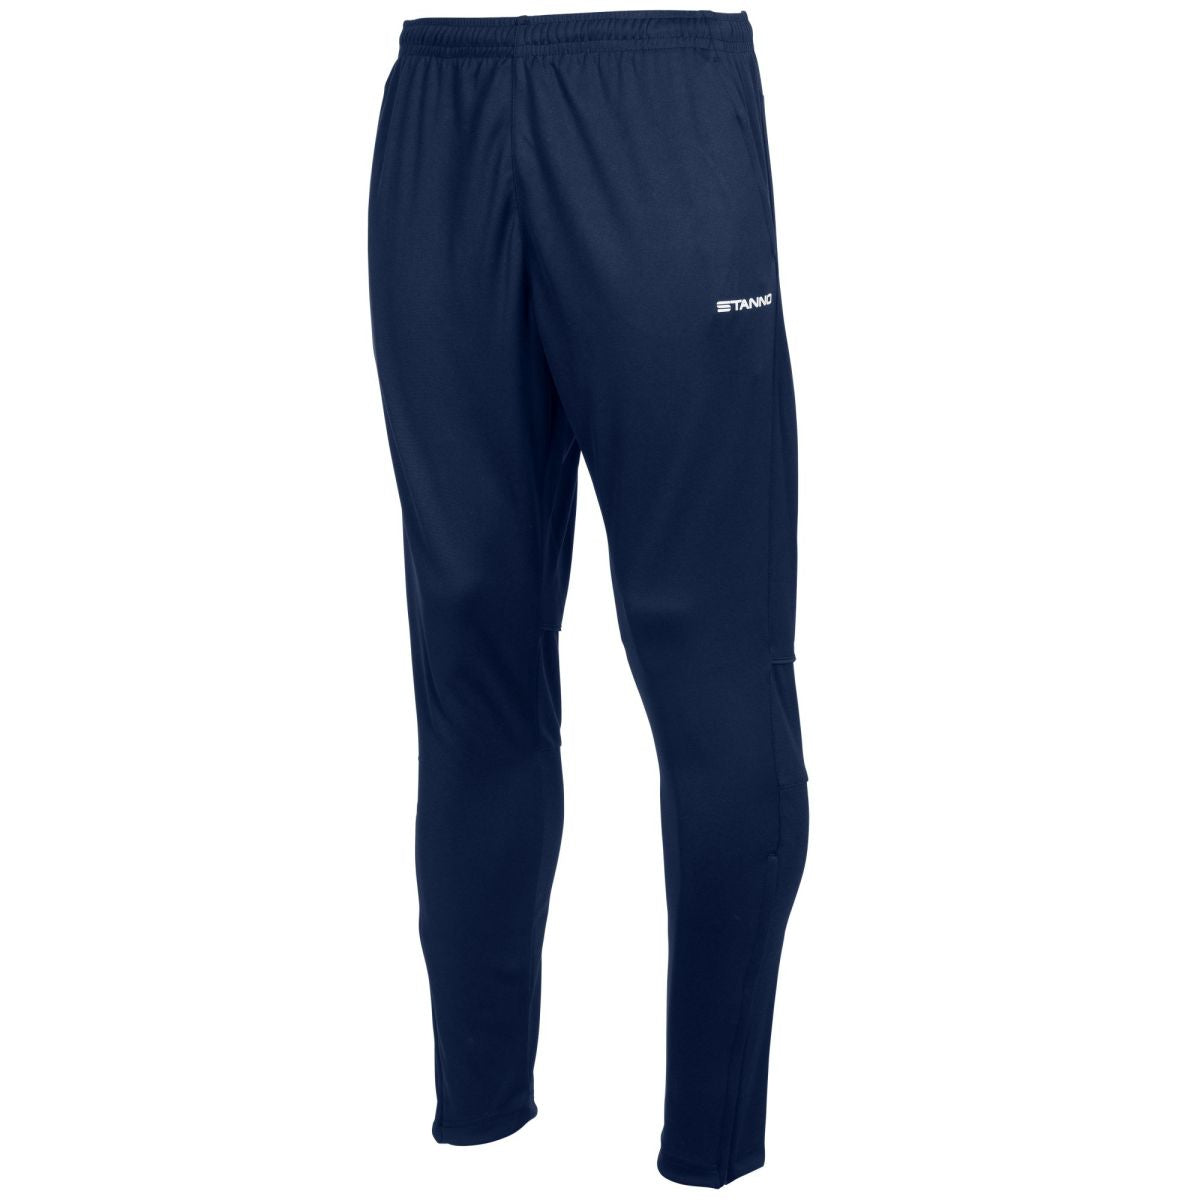 CENTRO FITTED PANTS Navy